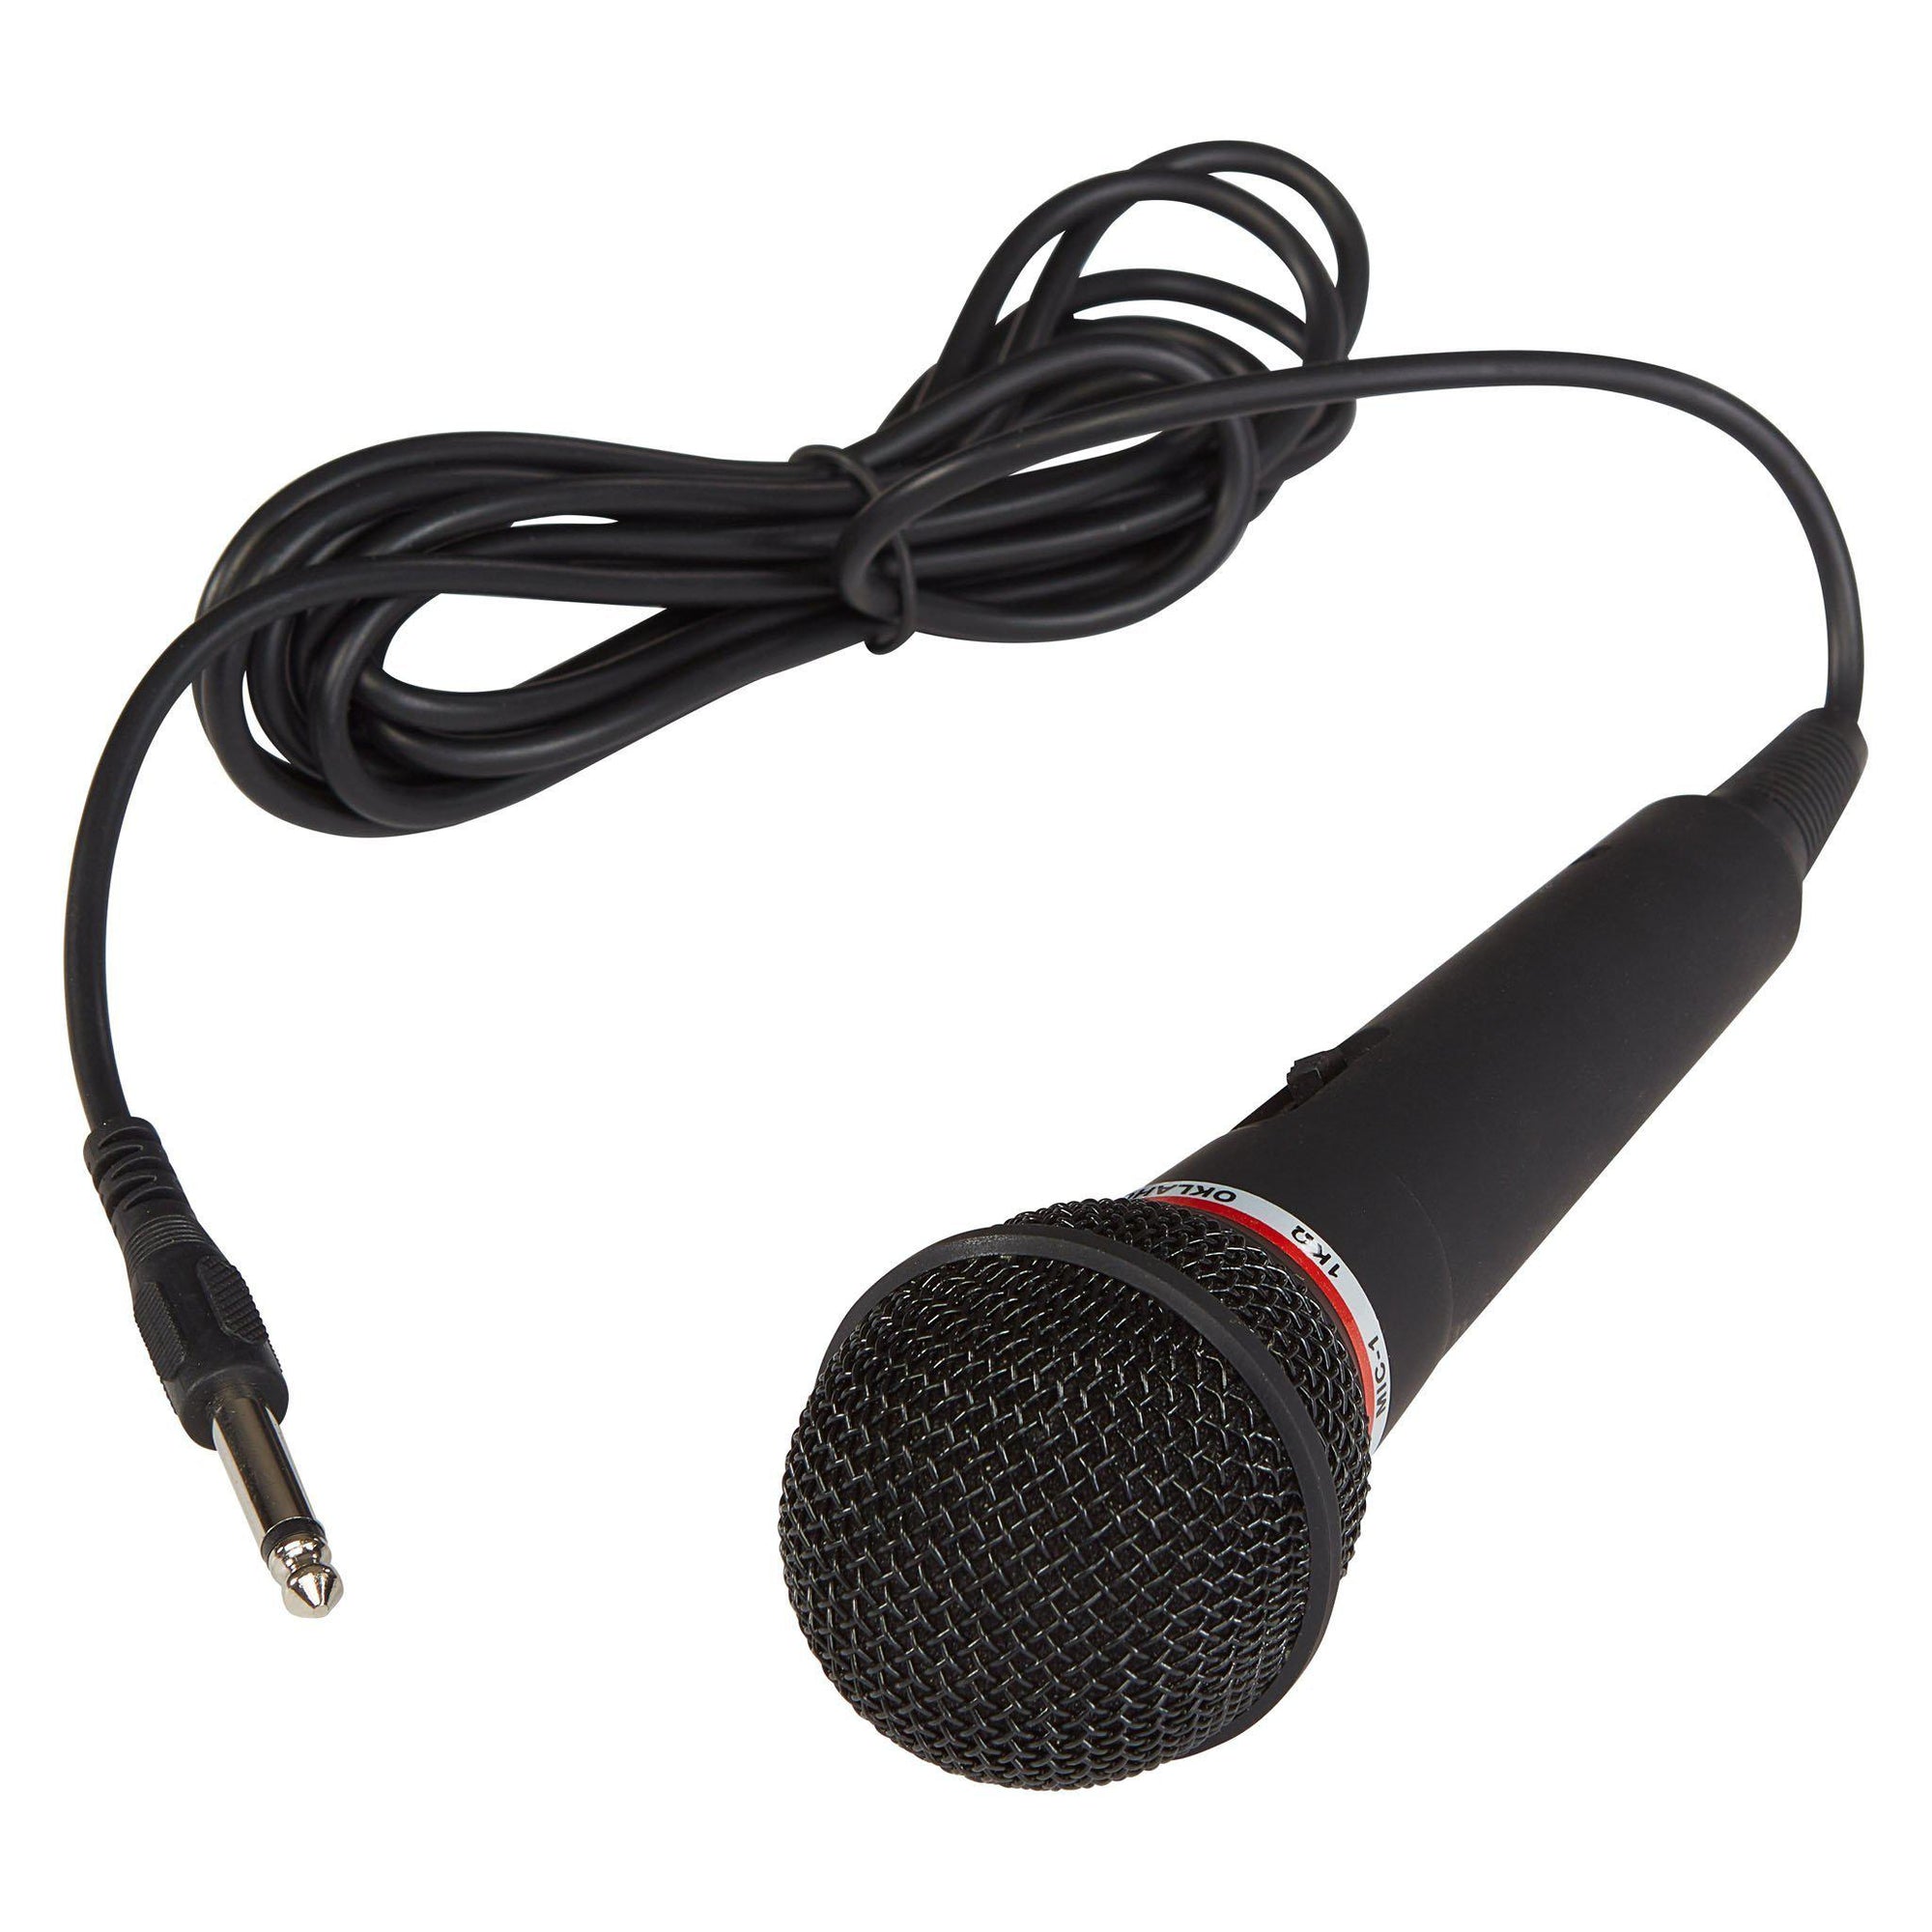 Oklahoma Sound® Electret Condenser Microphone with 9-Foot Cable-Lecterns & Podiums-